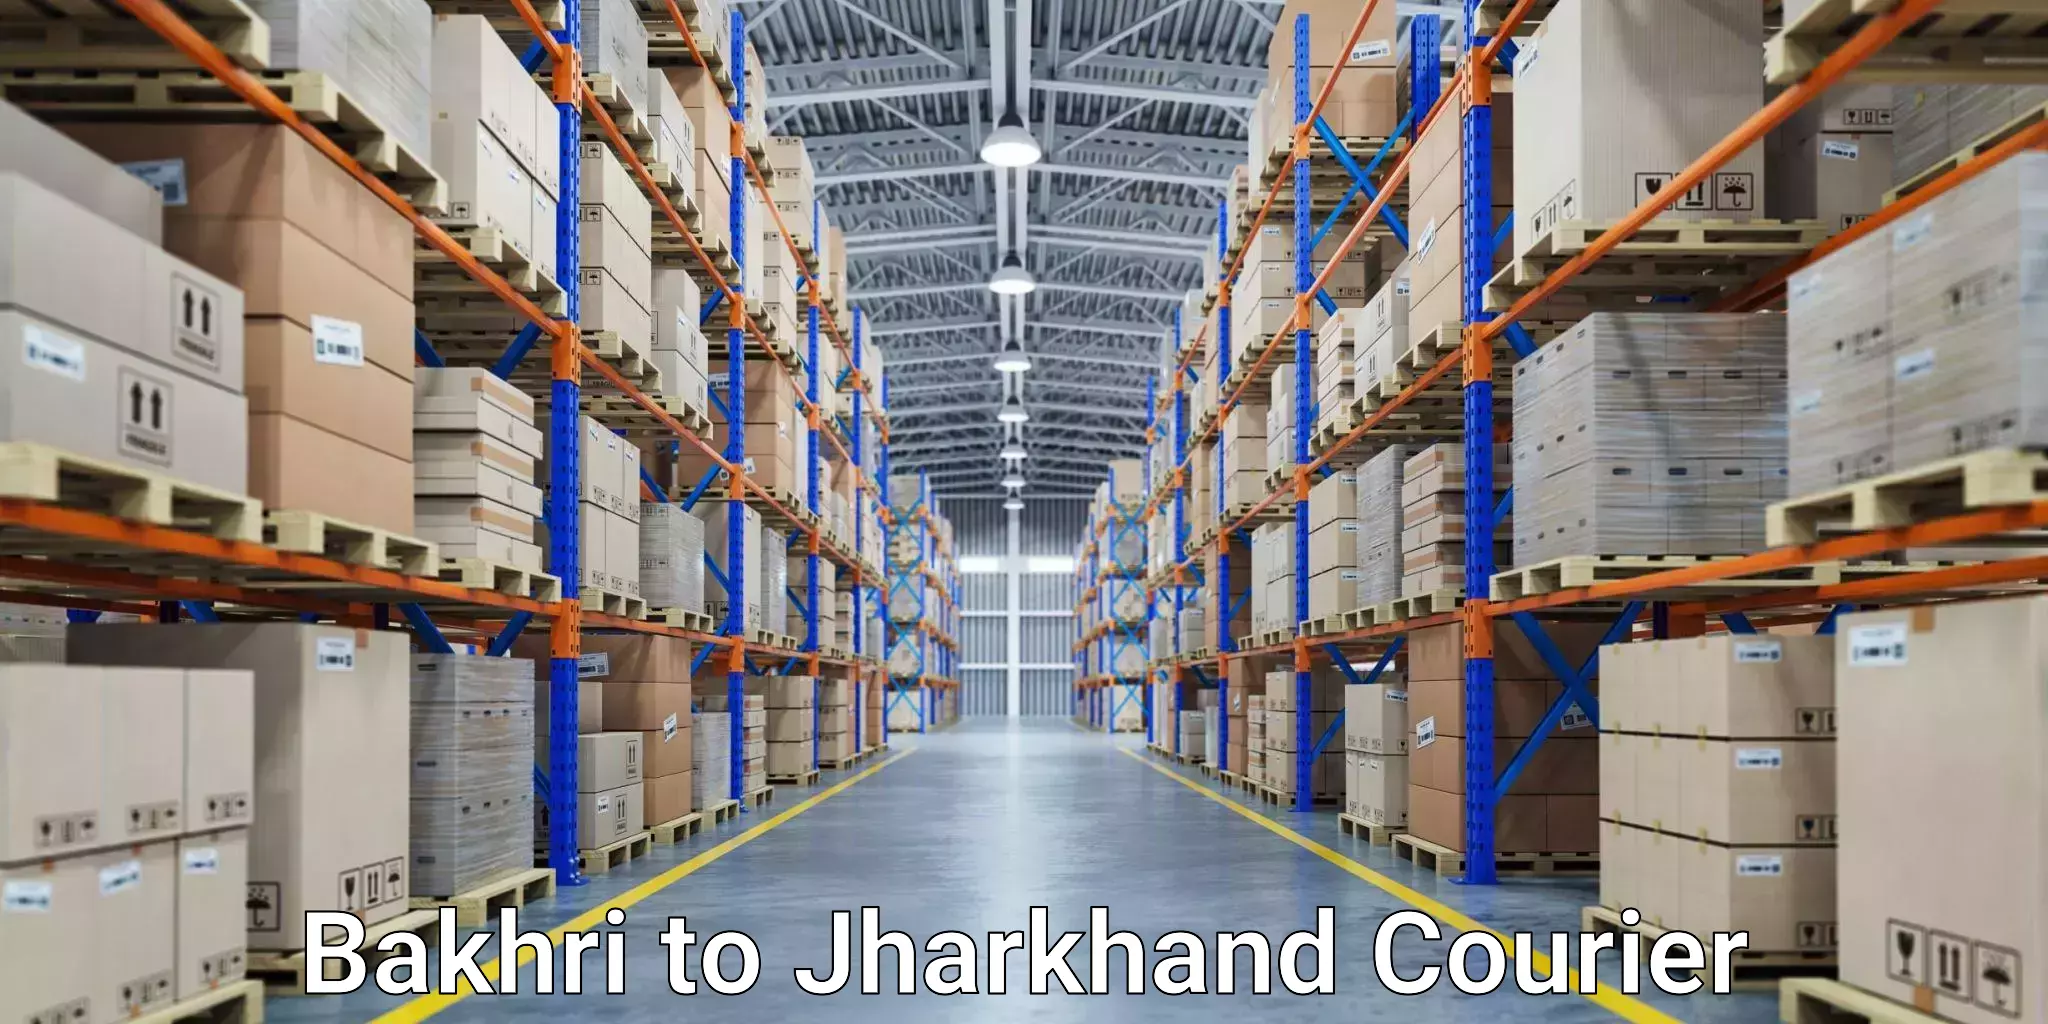 Air courier services in Bakhri to Jharkhand